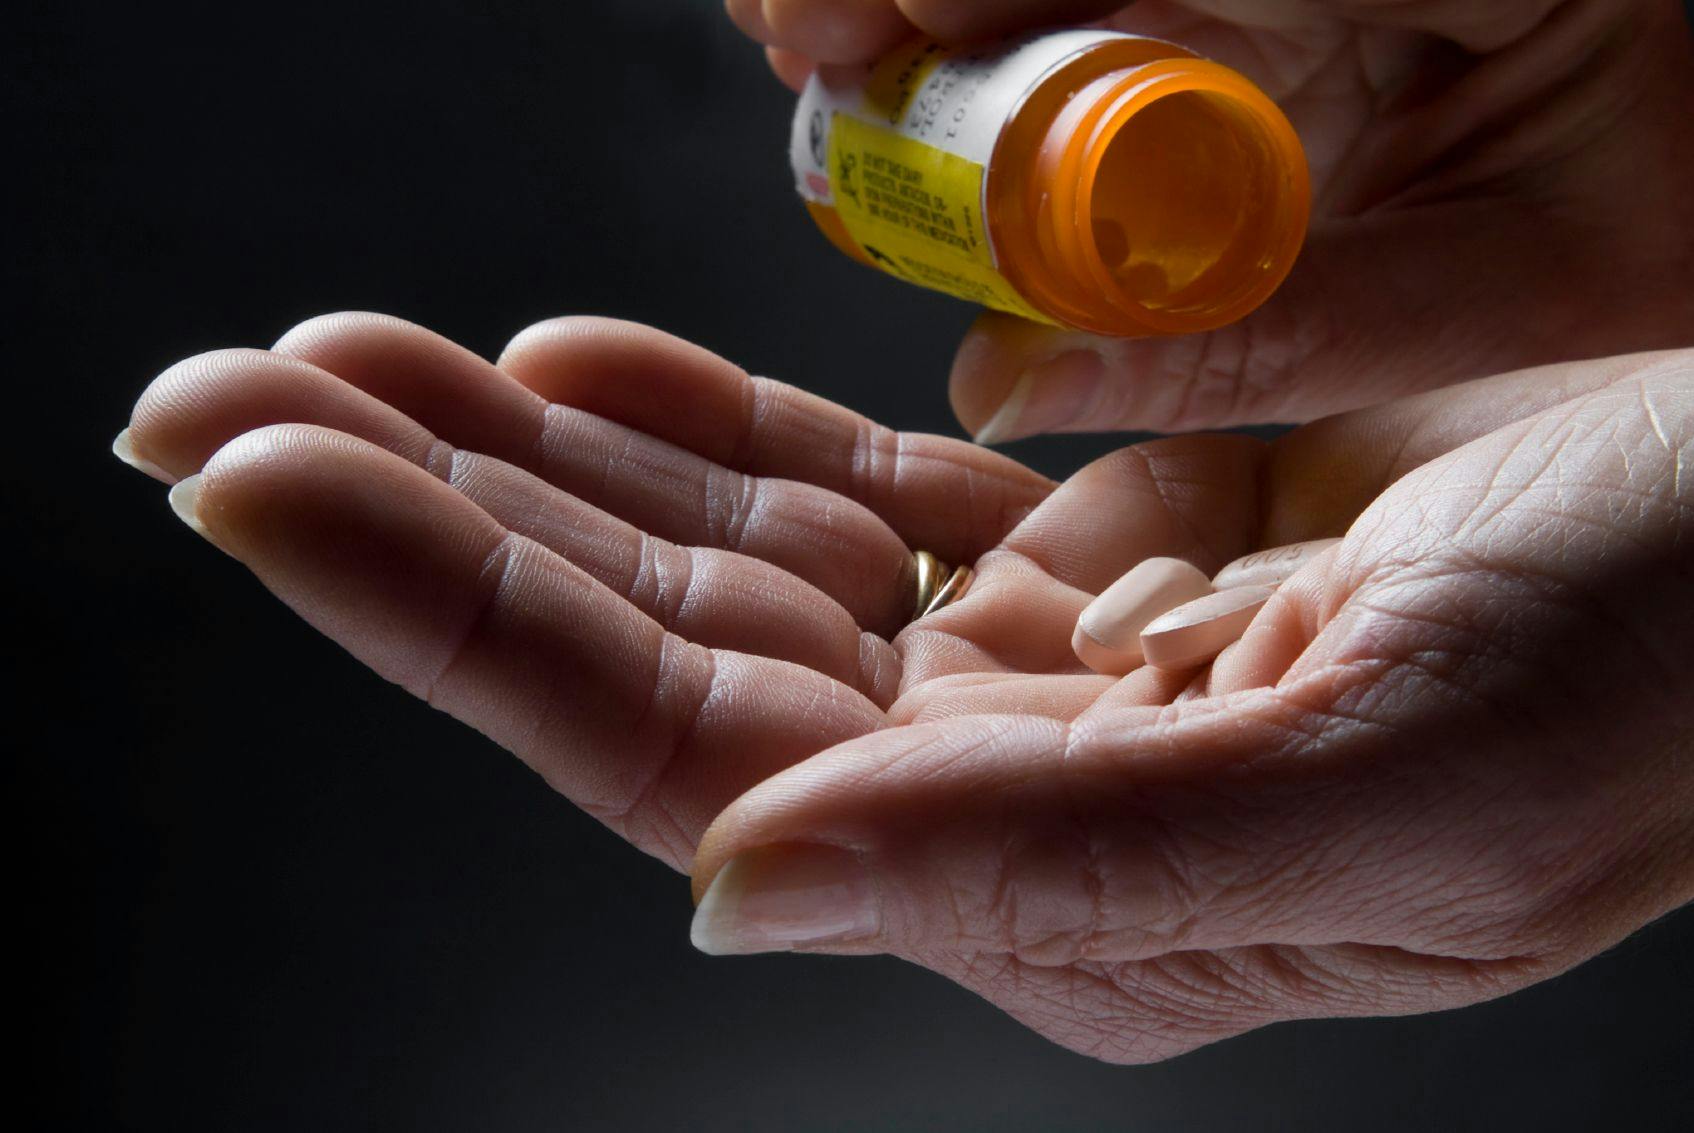 Image of a person pouring pills into their hands. 